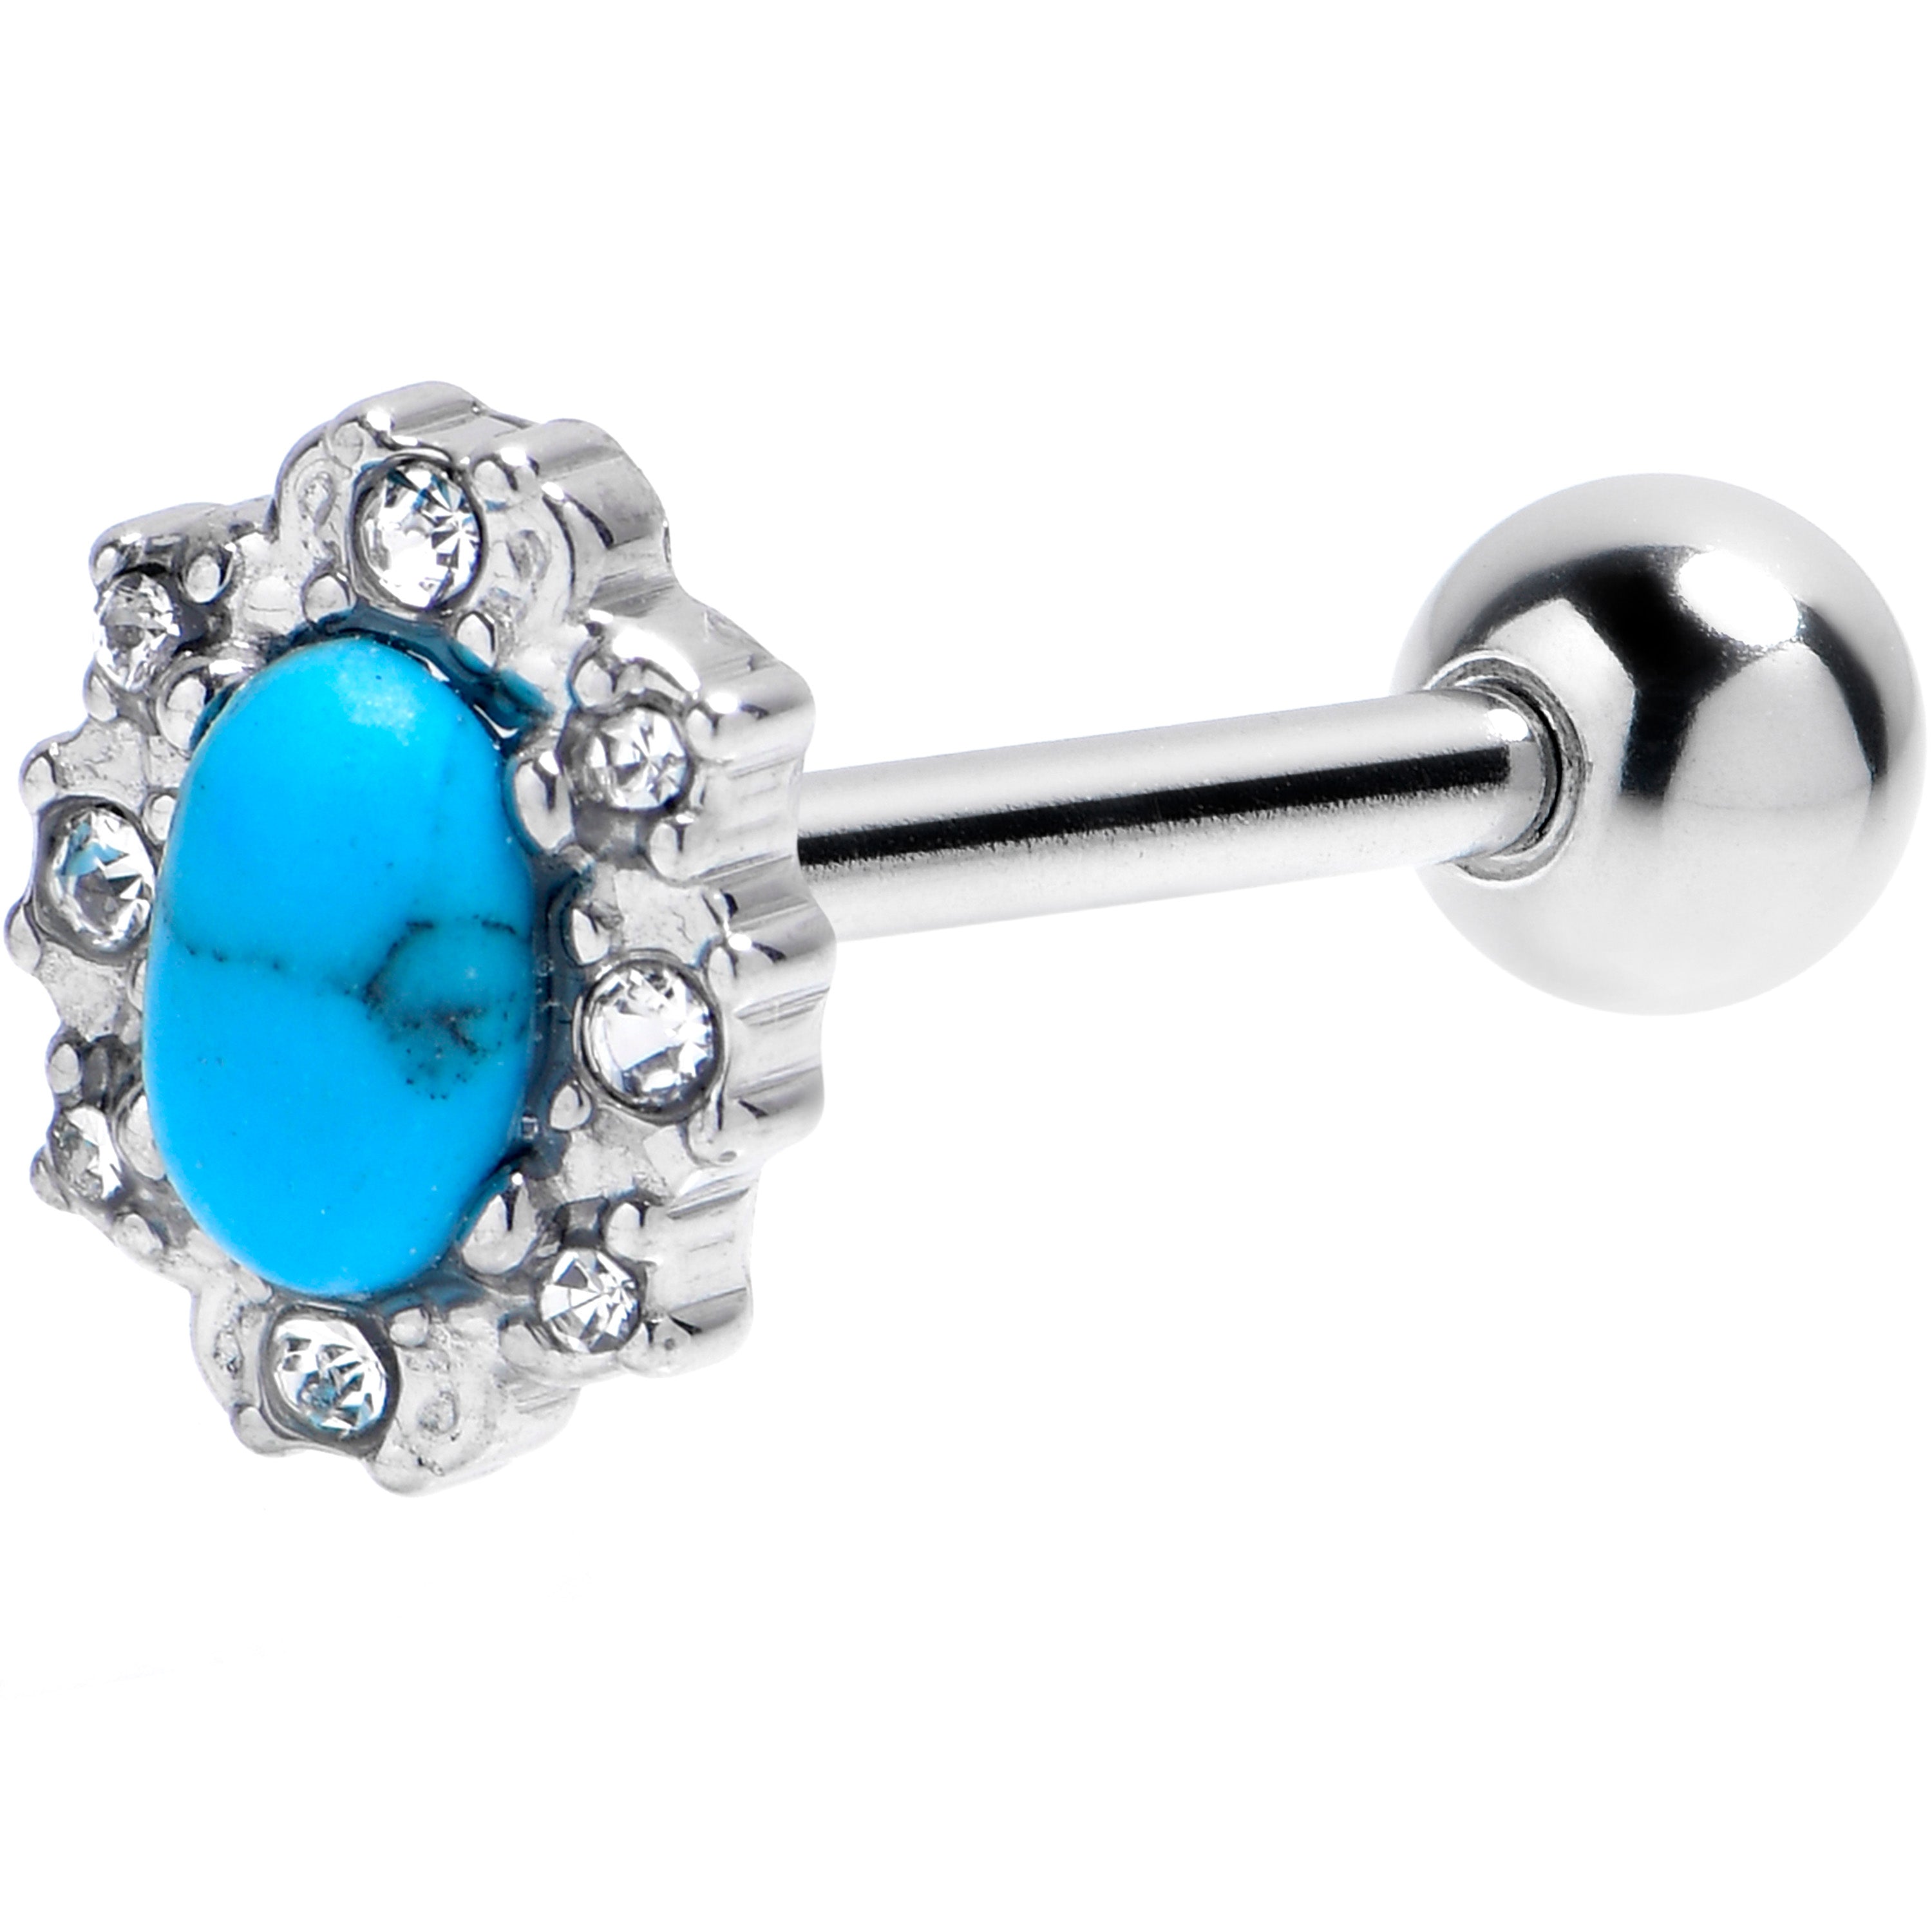 Blue Turquoise Stone Filigree Square Barbell Tongue Ring